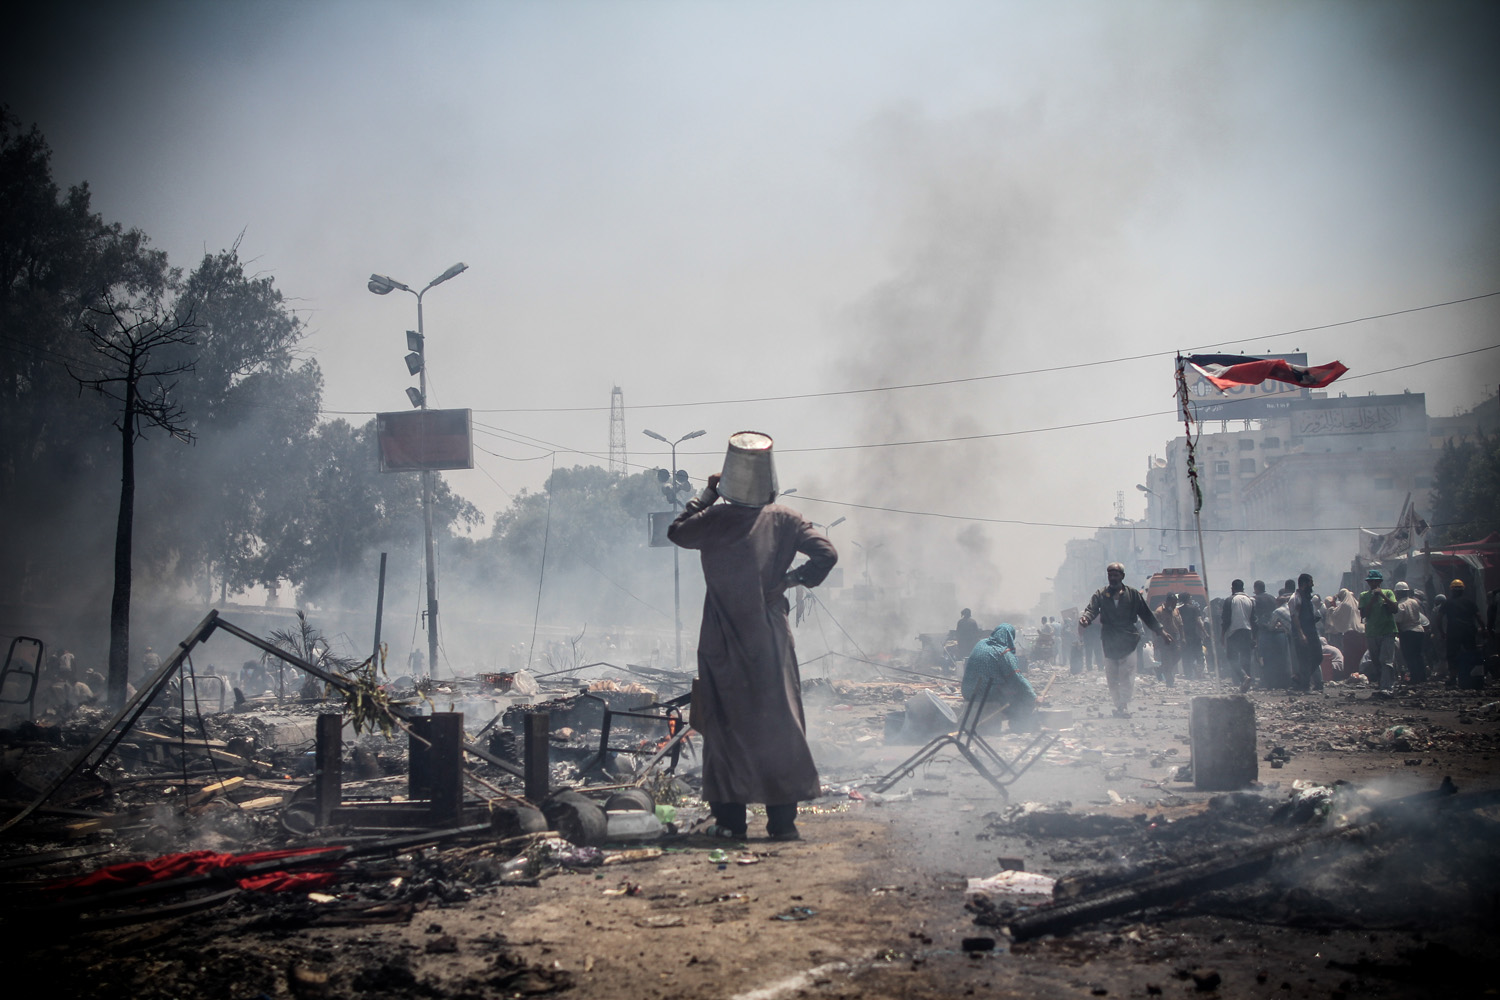 Aug. 14, 2013. A man covering his head with a bucket observes the destruction at Rabaa Adaweya camp during the violent dispersal by security forces.